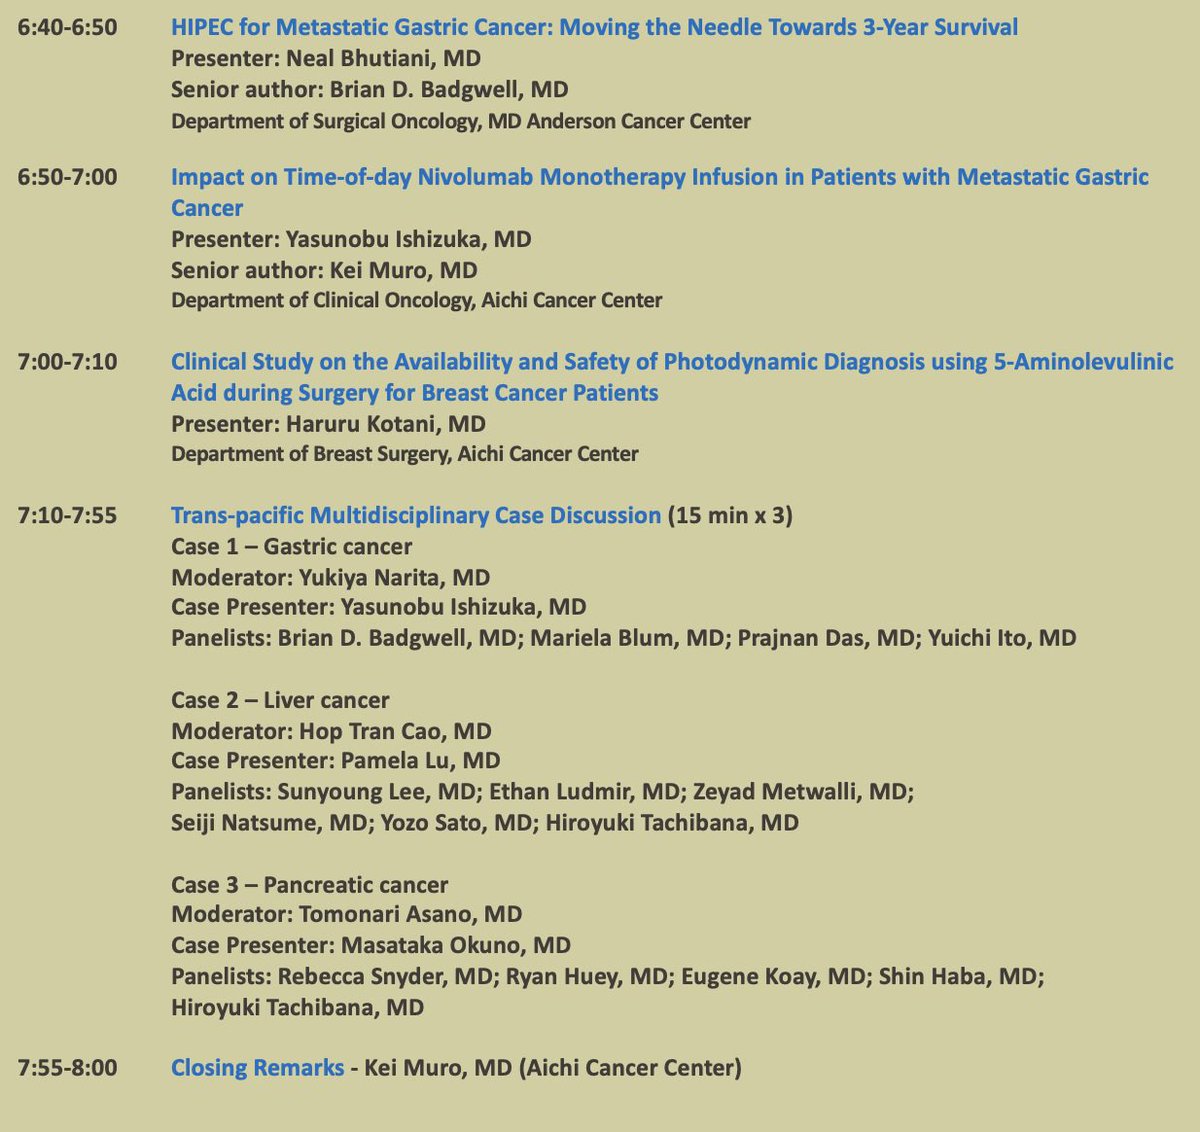 1st MD Anderson-Aichi Cancer Center Joint Cancer Symposium on 3/8 Fri 5-8 pm CST. start with our own Dr. Pisters’ lecture, followed by research/clinical lectures and MDC case discussions in topics of HPB/gastric cancers. Join us virtually! Bit.ly/3SHi6IR @MDAndersonNews